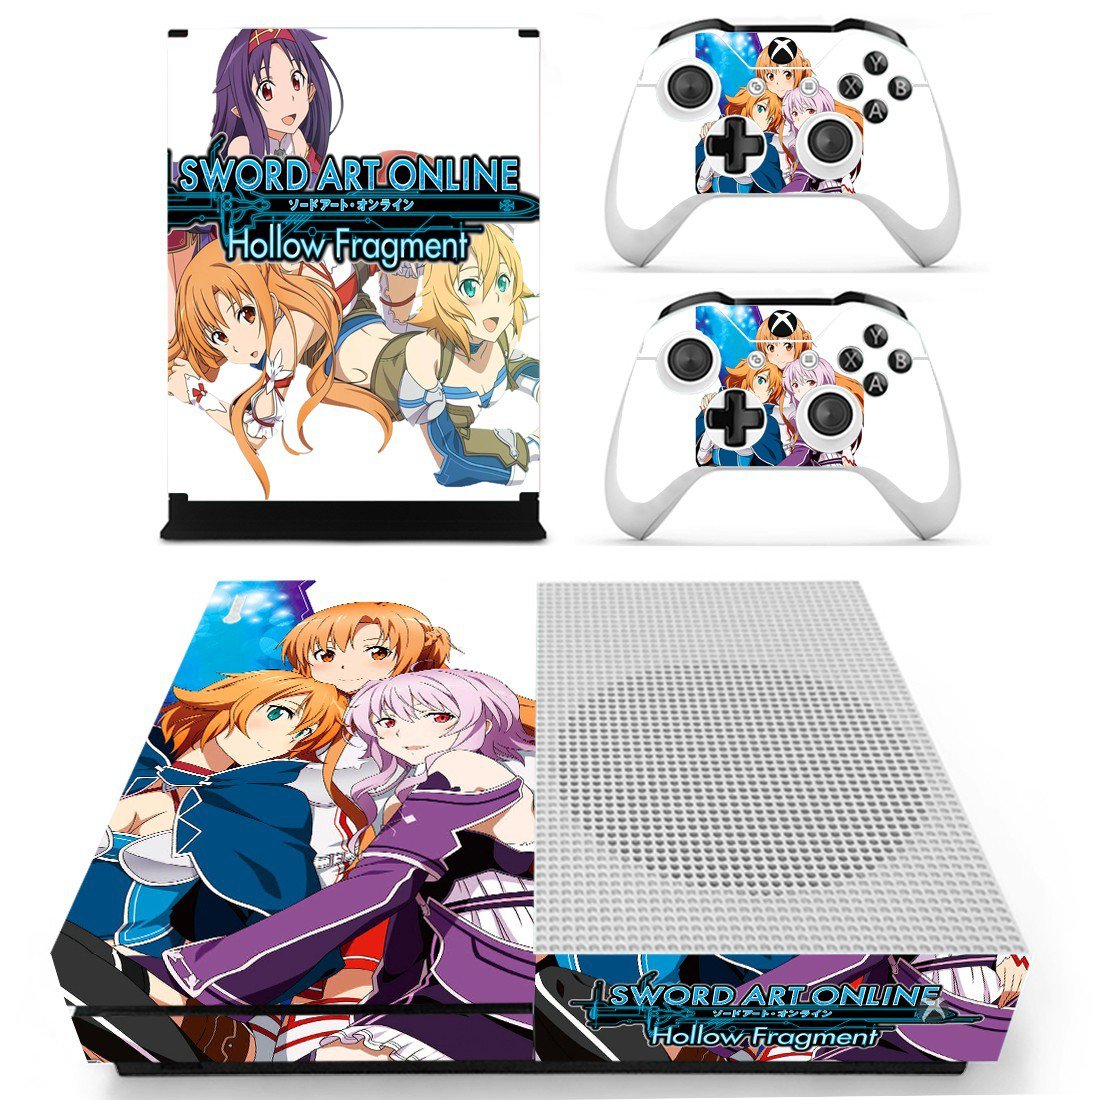 Xbox One S Skin Cover - Sword Art Online Hollow Fragment